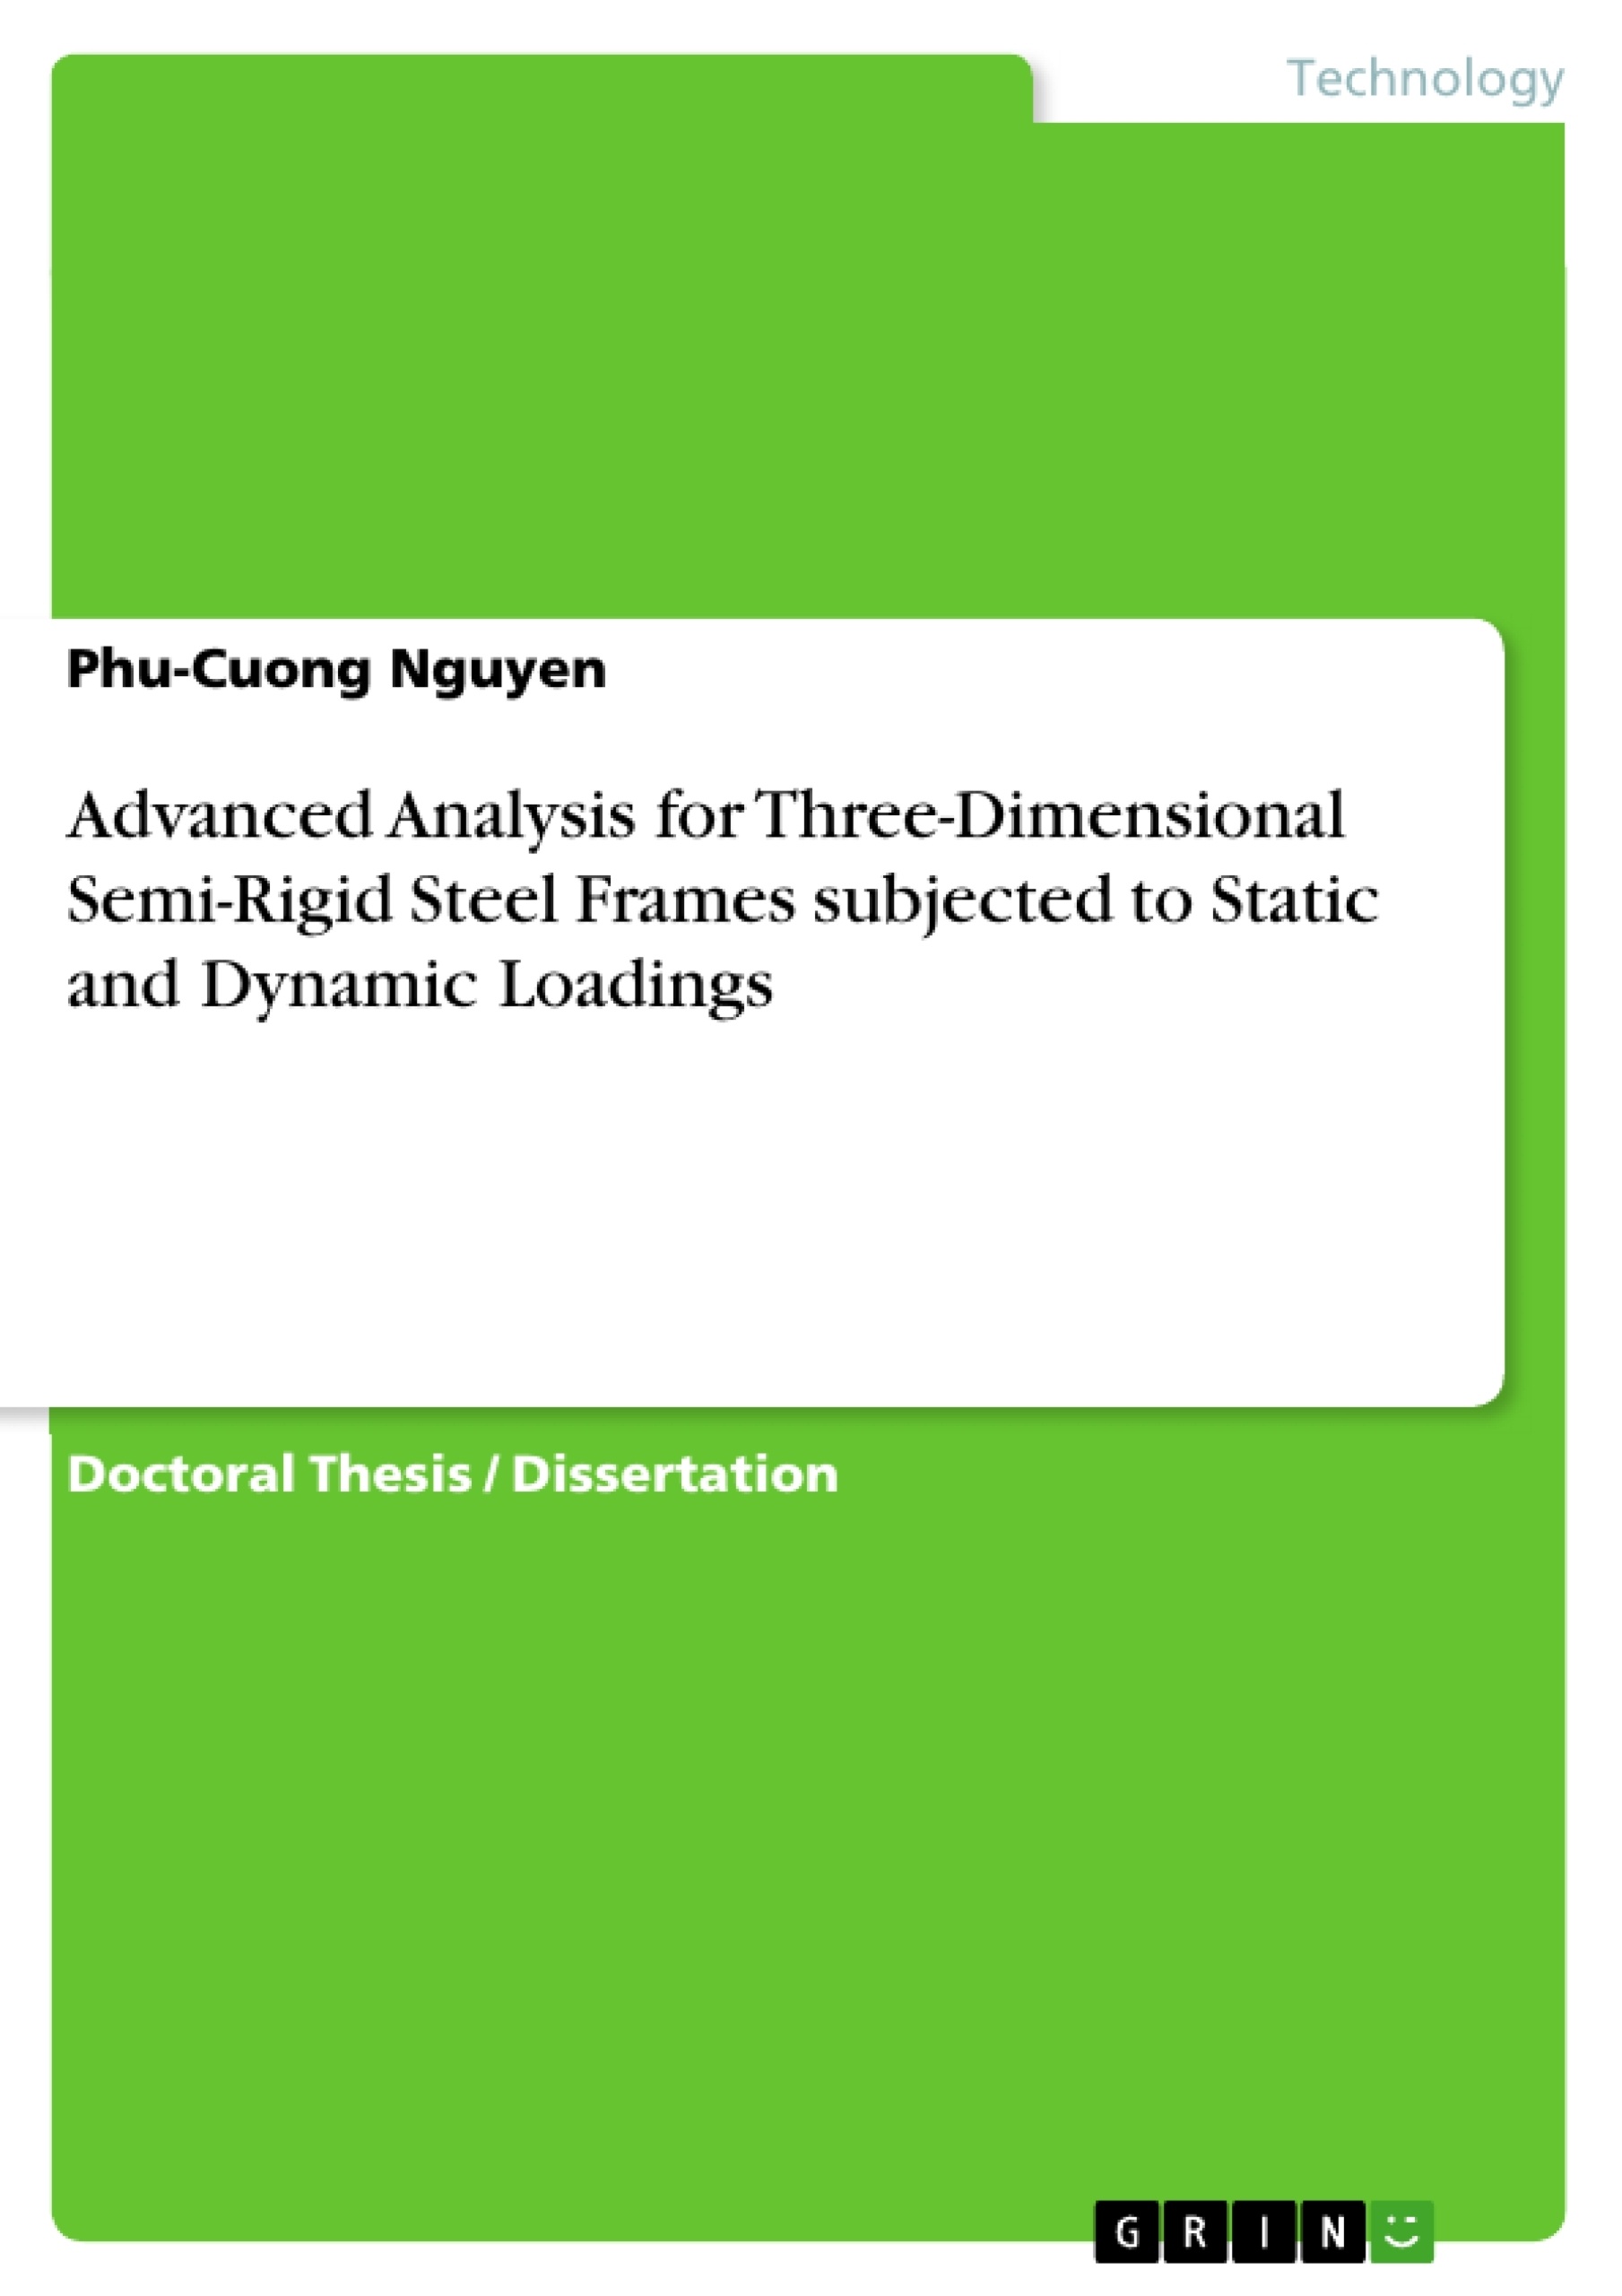 Title: Advanced Analysis for Three-Dimensional Semi-Rigid Steel Frames subjected to Static and Dynamic Loadings